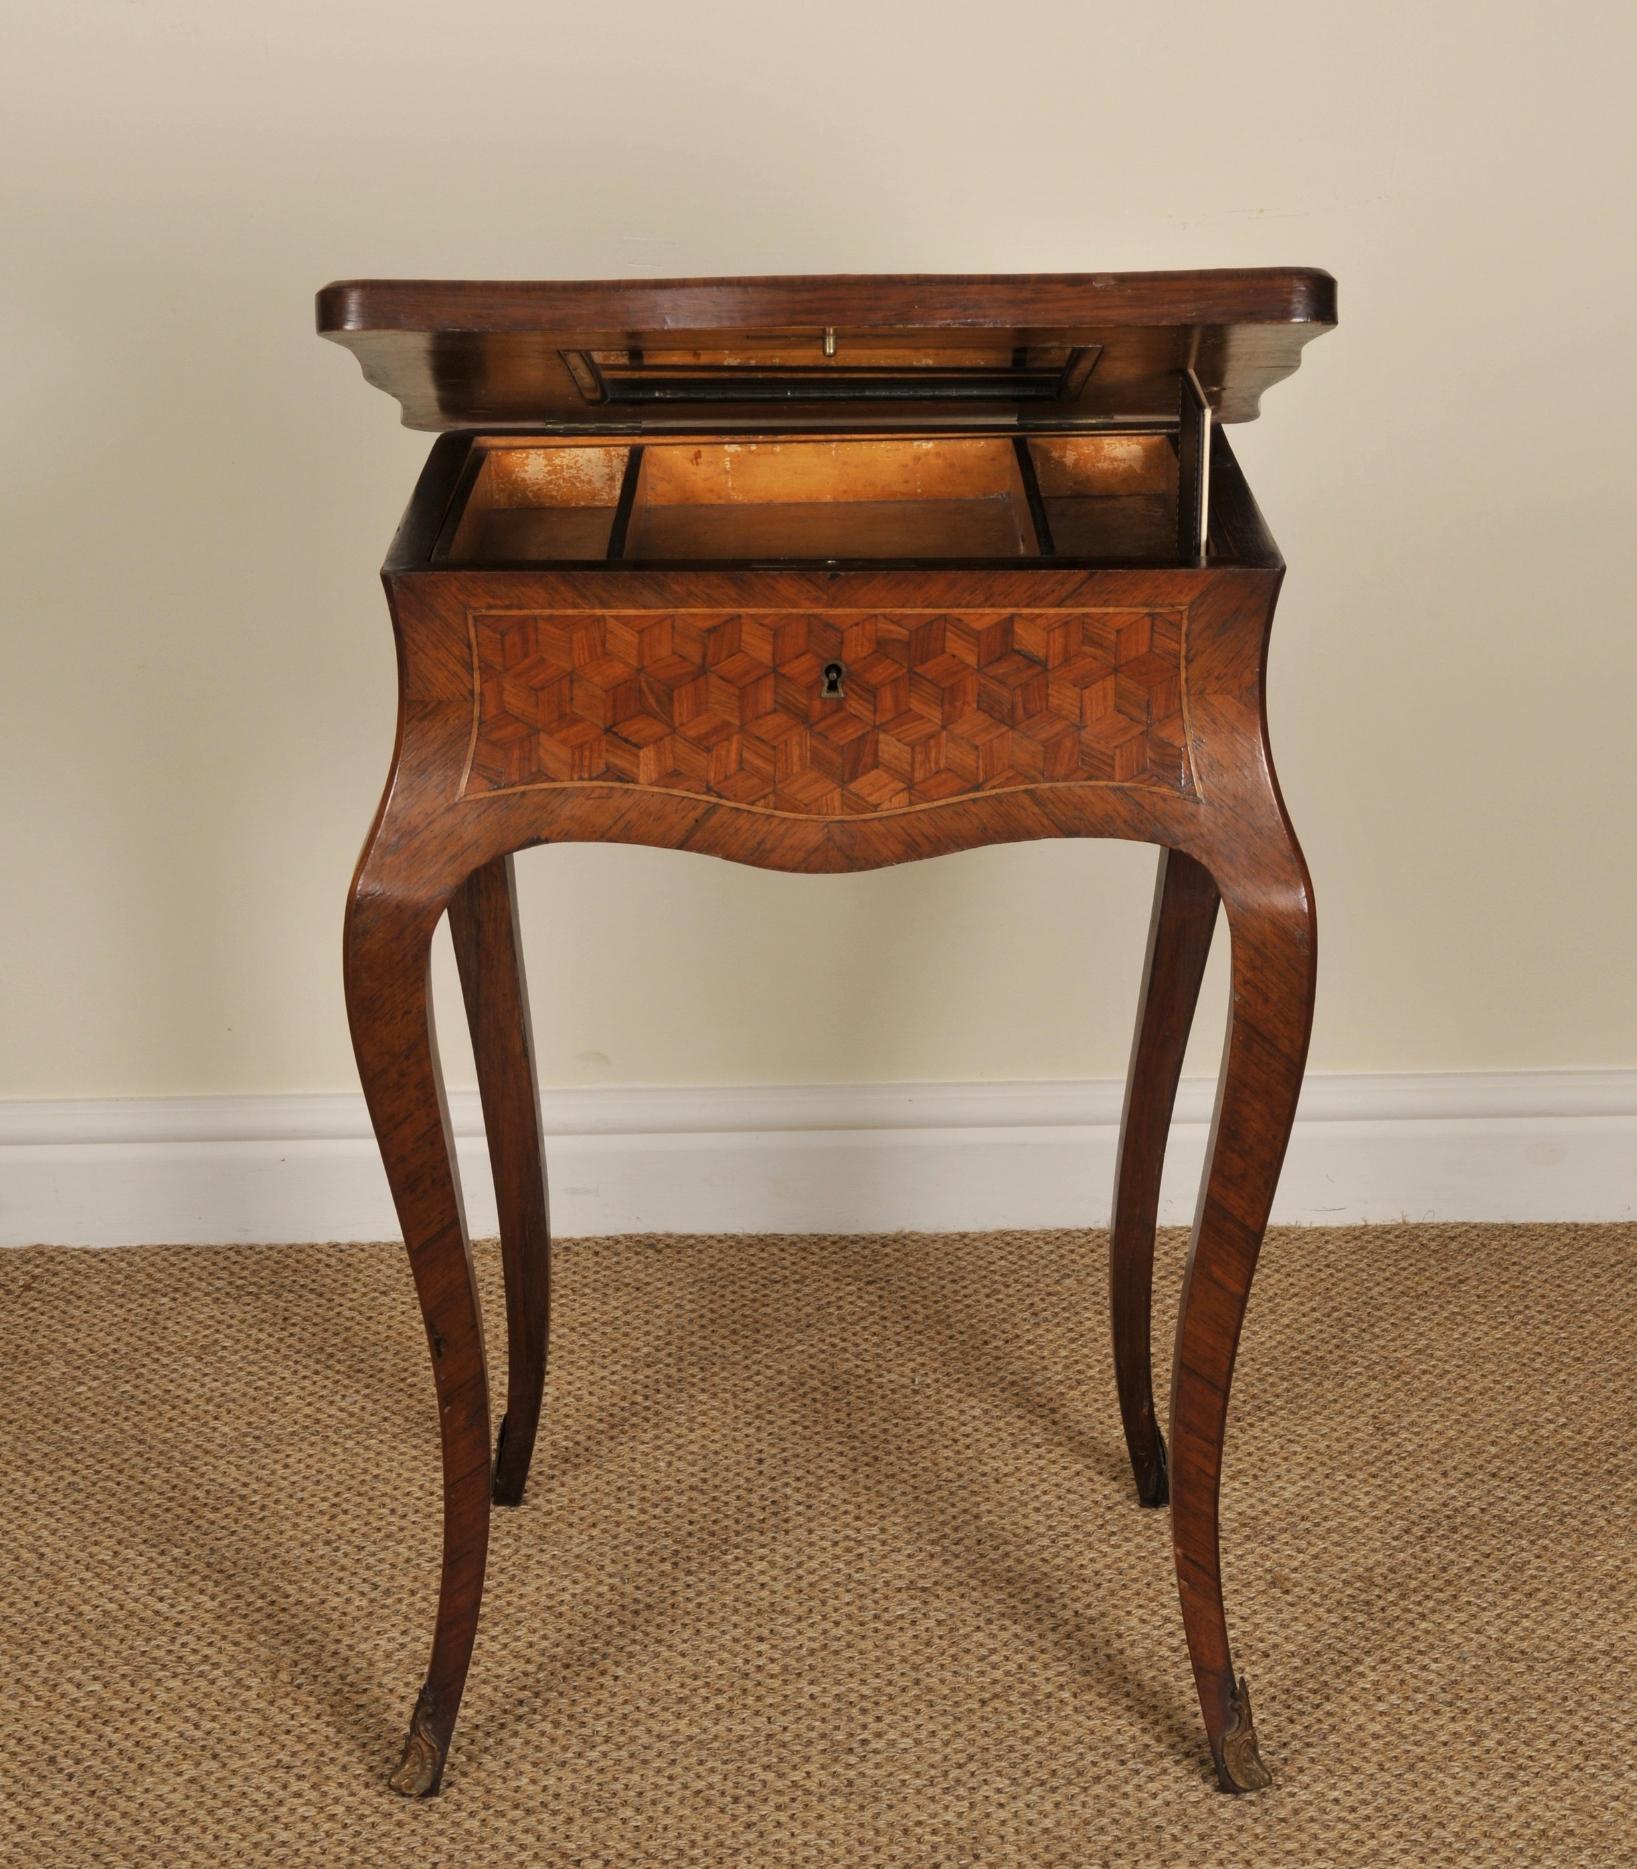 A beautiful French dressing table, circa 1880

 

With exquisite detail on the lid, a mirror on the inside of the lid, small compartments on the inside and delicate curving on the legs. With fruitwoods of kingwood, harewood and tulipwood